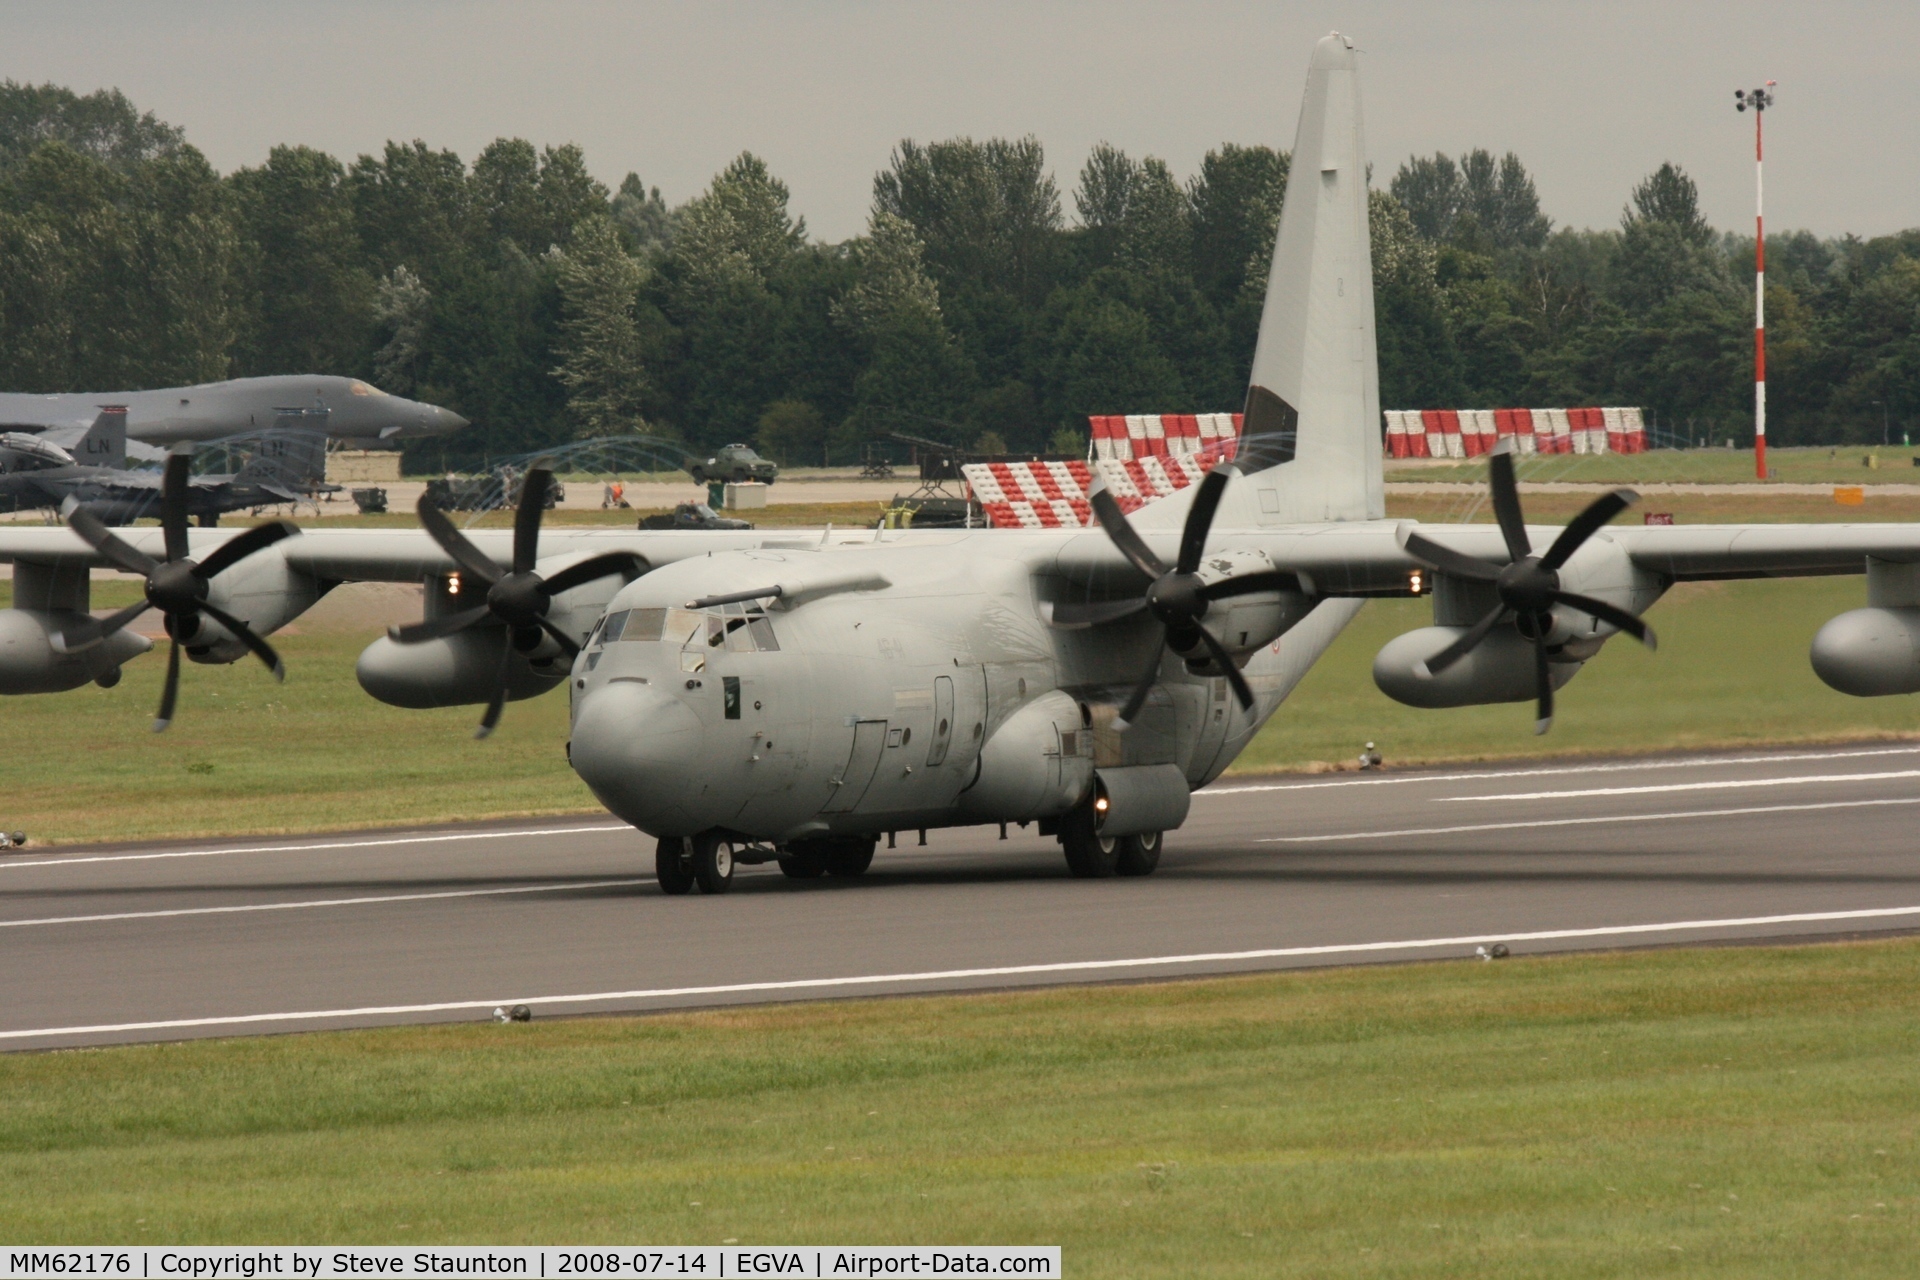 MM62176, Lockheed Martin KC-130J Hercules C/N 382-5497, Taken at the Royal International Air Tattoo 2008 during arrivals and departures (show days cancelled due to bad weather)